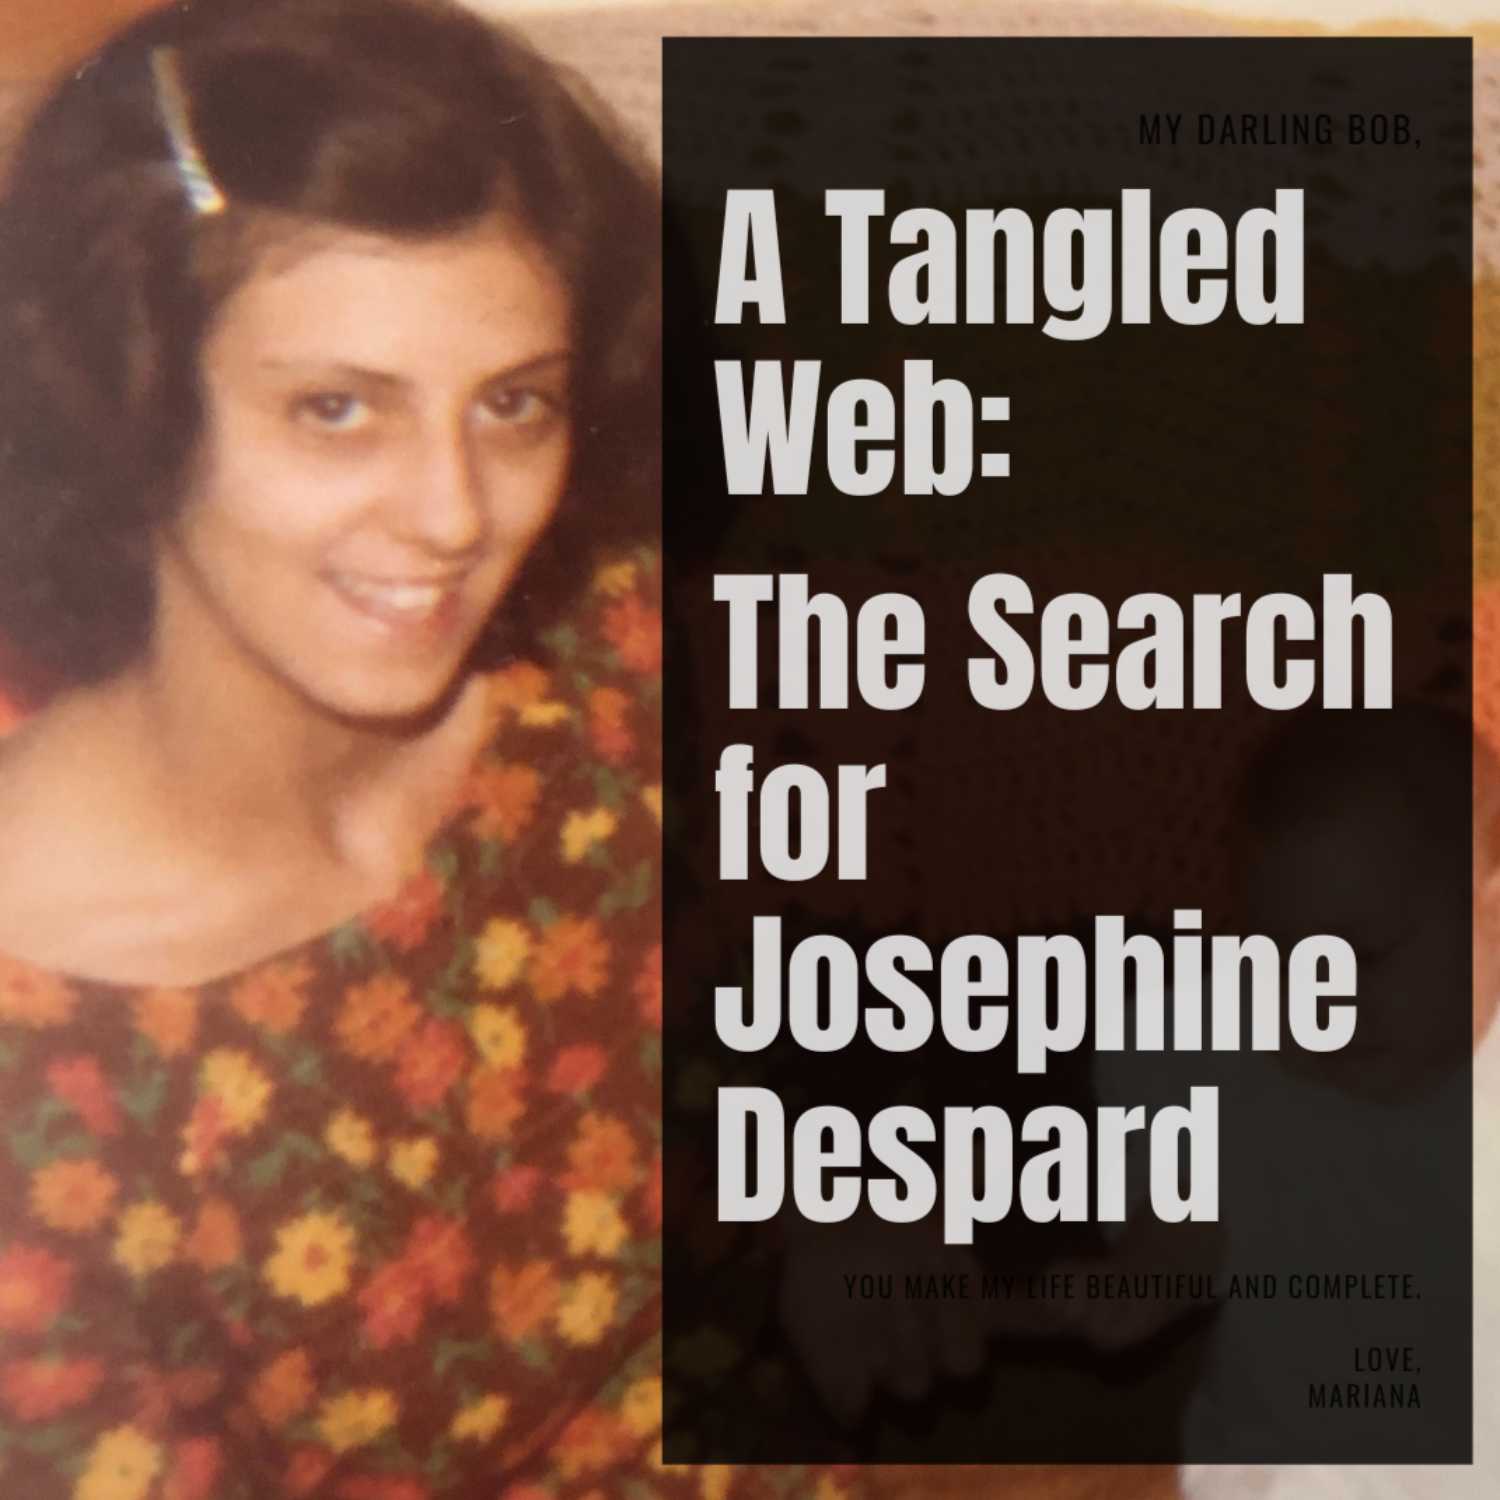 A Tangled Web: The Search for Josephine Despard